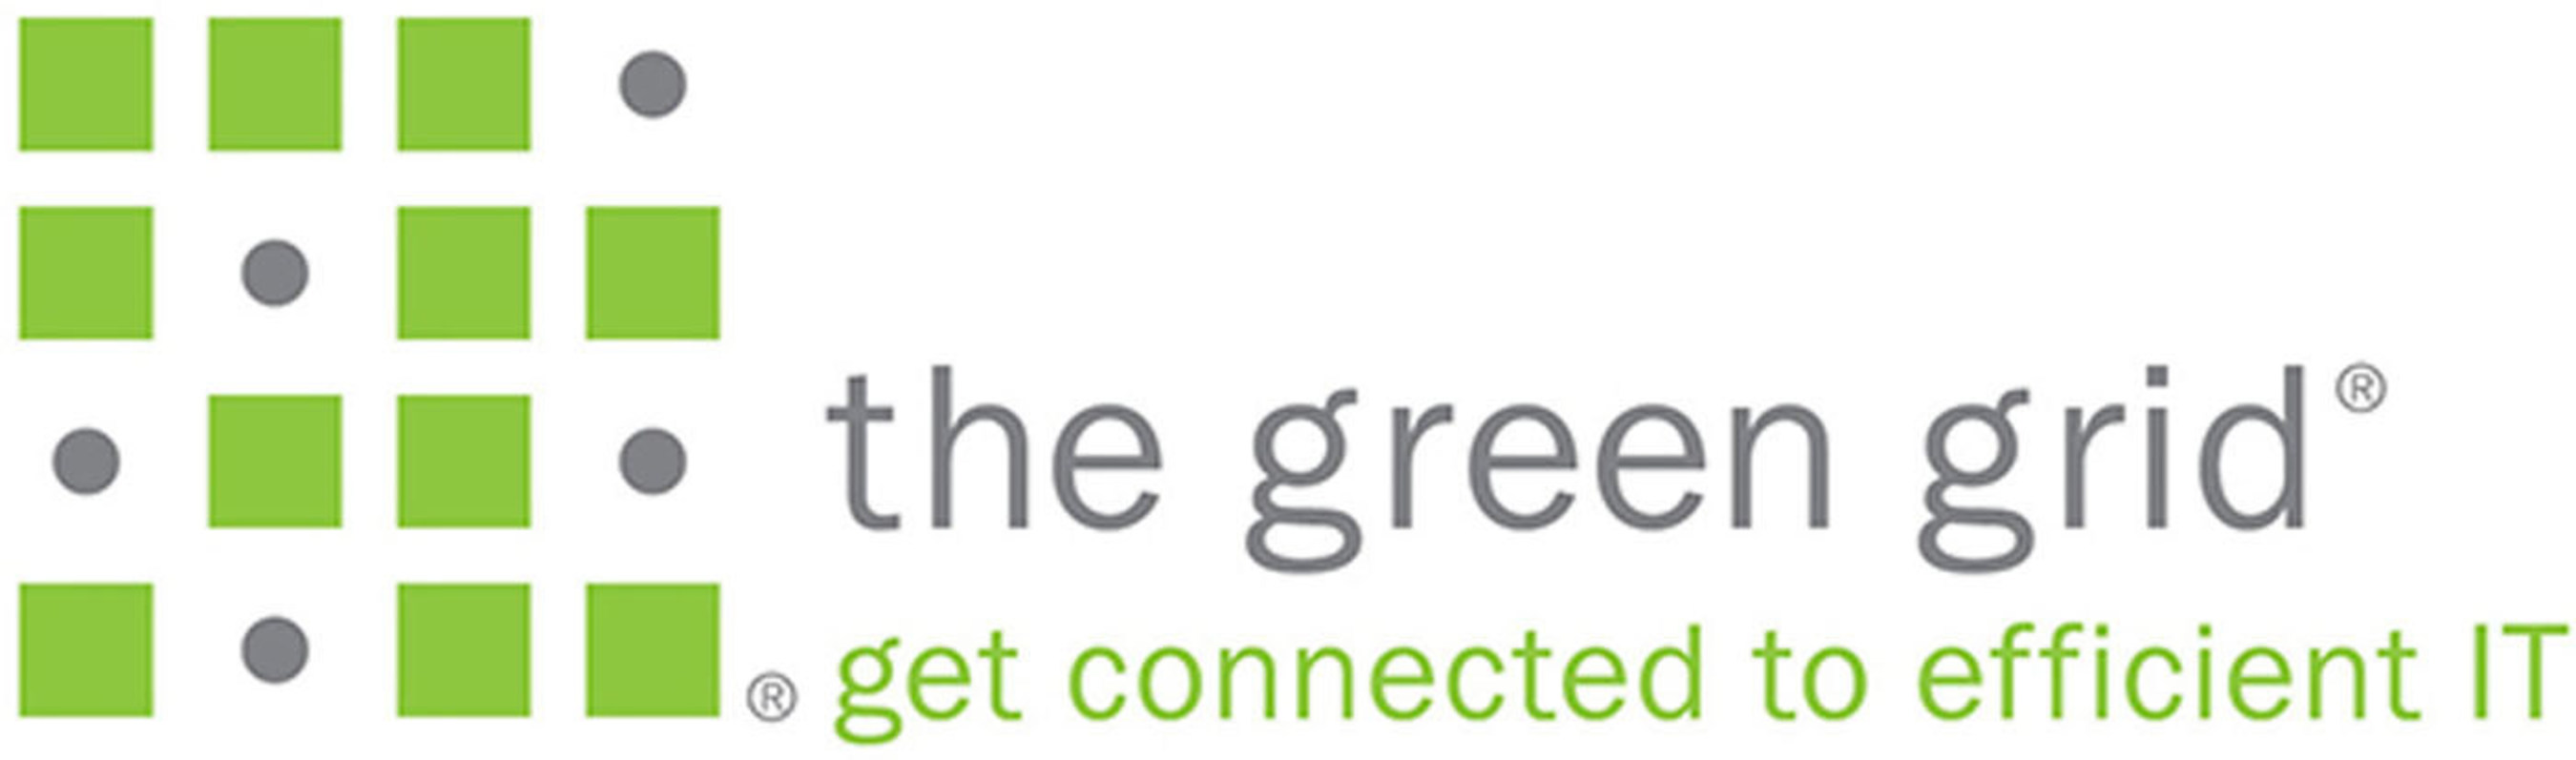 The Green Grid Association is a non-profit, open industry consortium that works to improve the resource efficiency of information technology and data centers throughout the world.